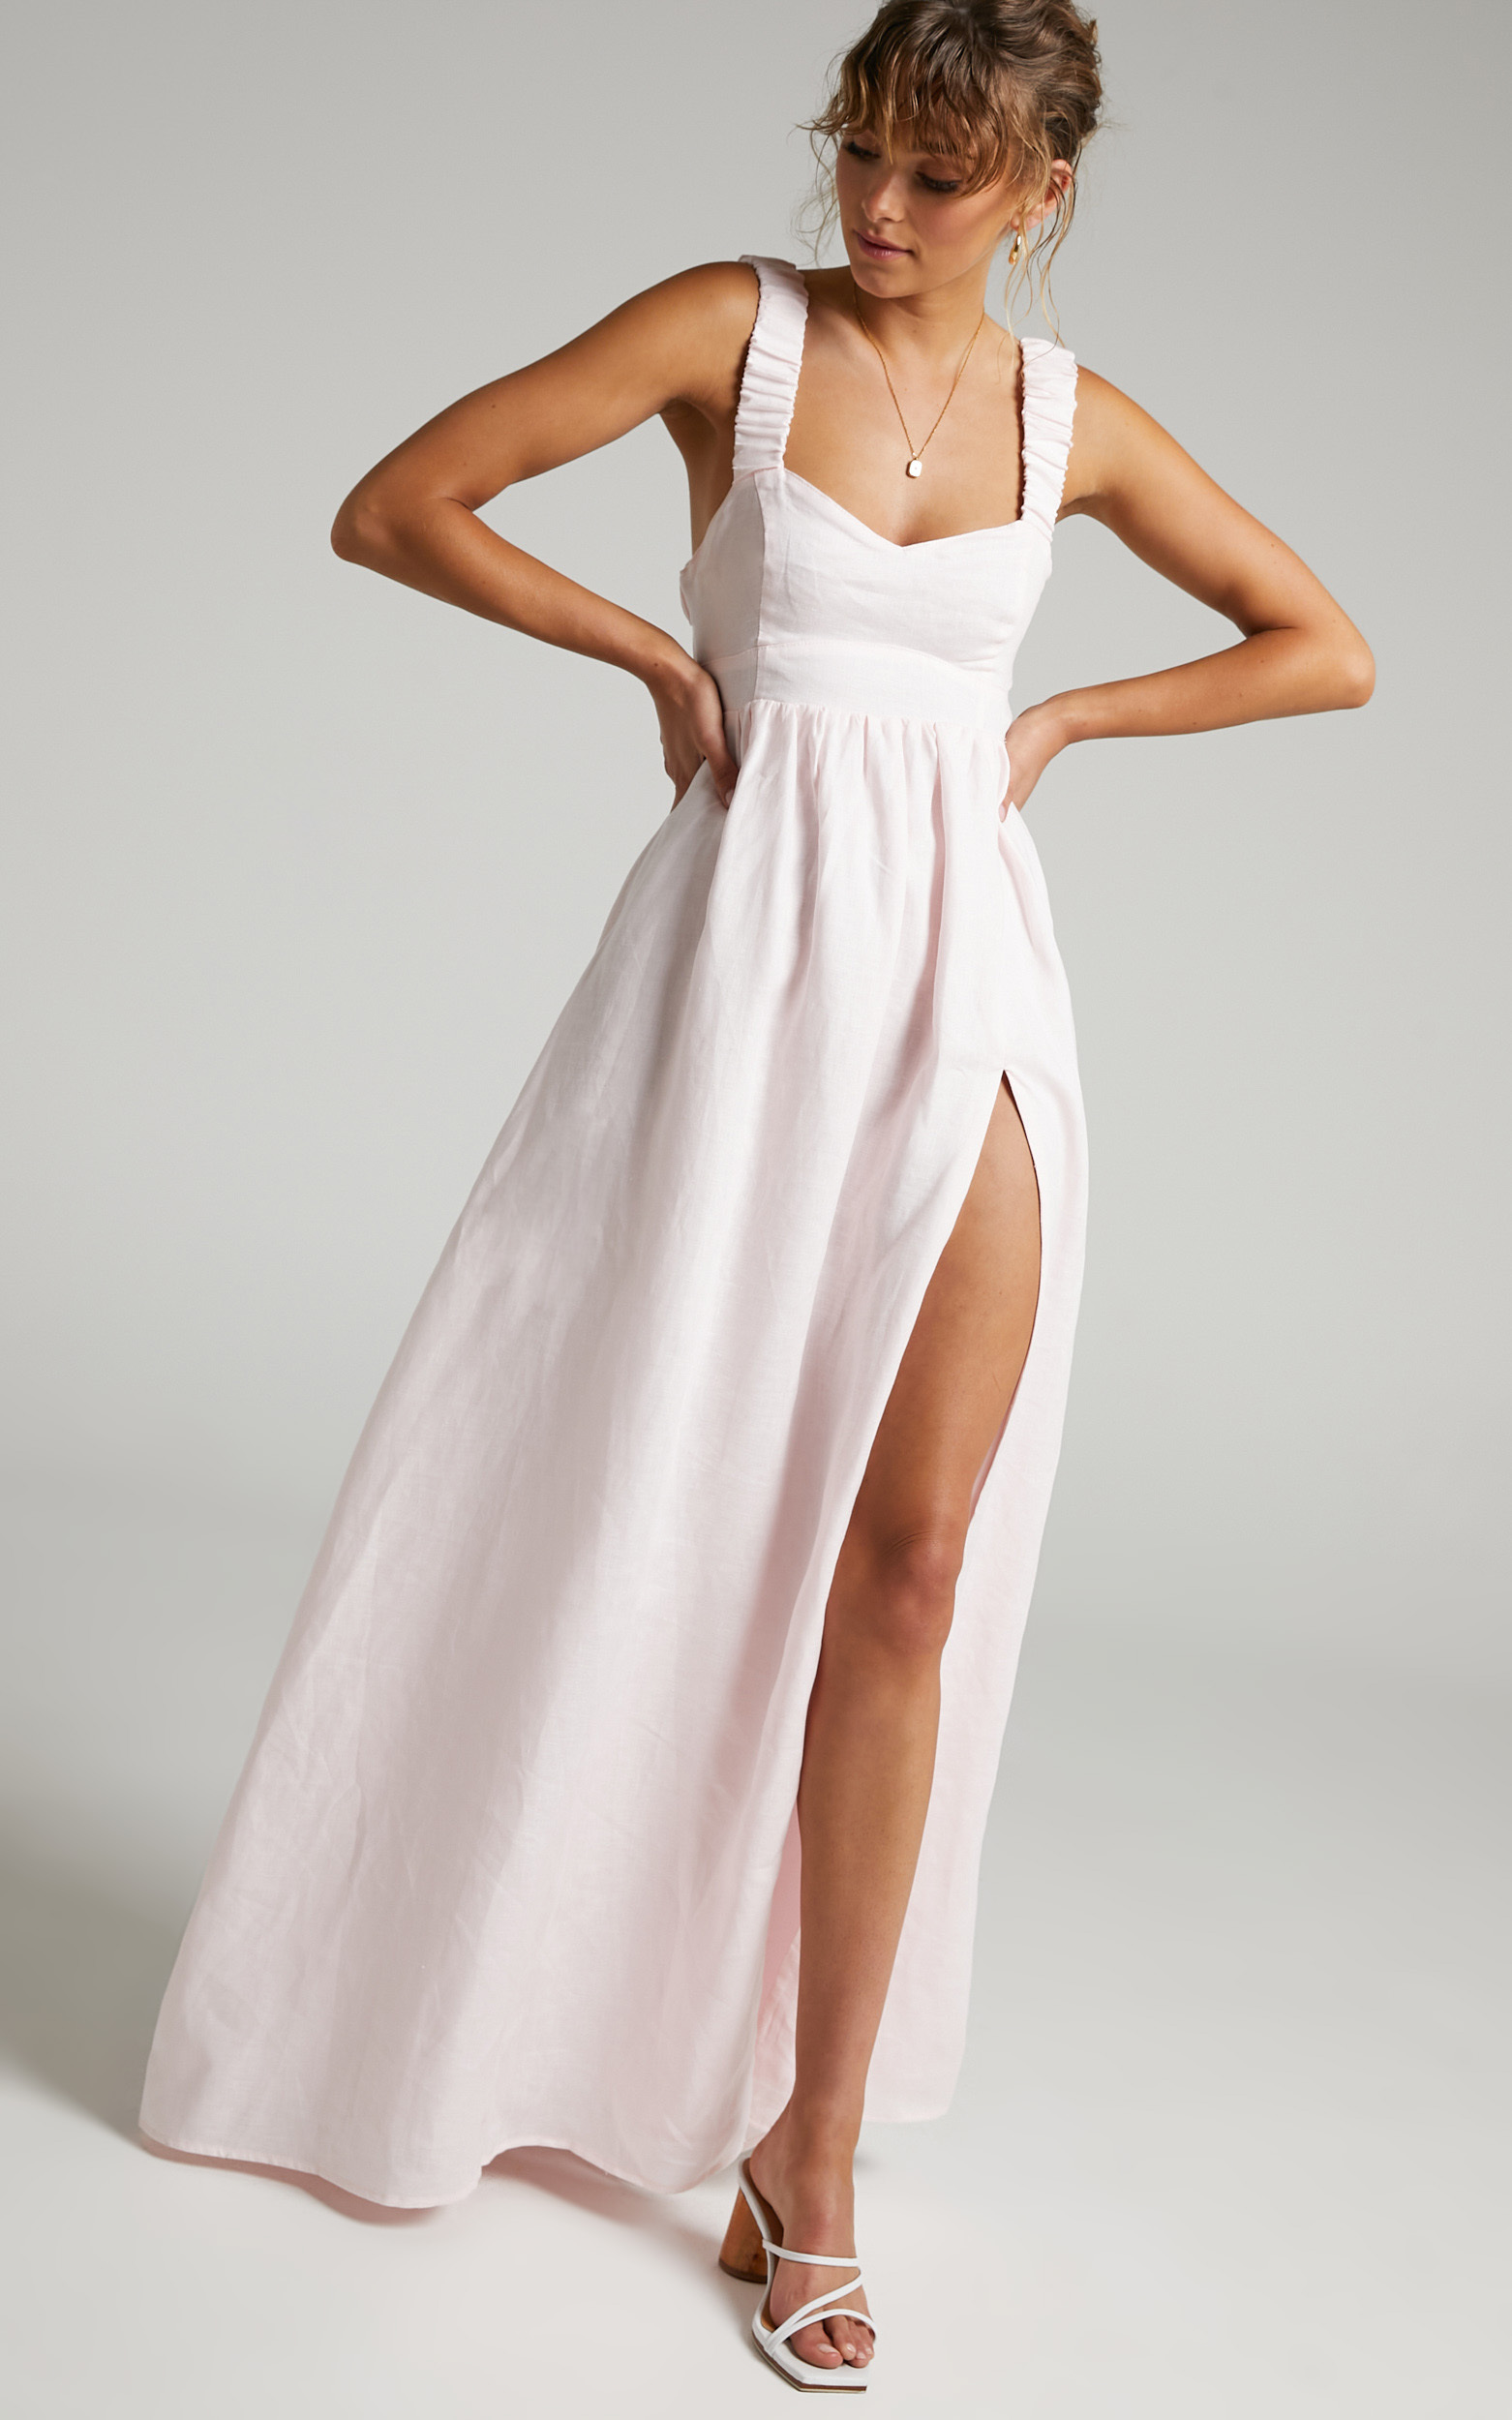 Amalie The Label - Lucia Linen Elasticated Strap Backless Maxi Dress in Off White - 04, CRE1, hi-res image number null